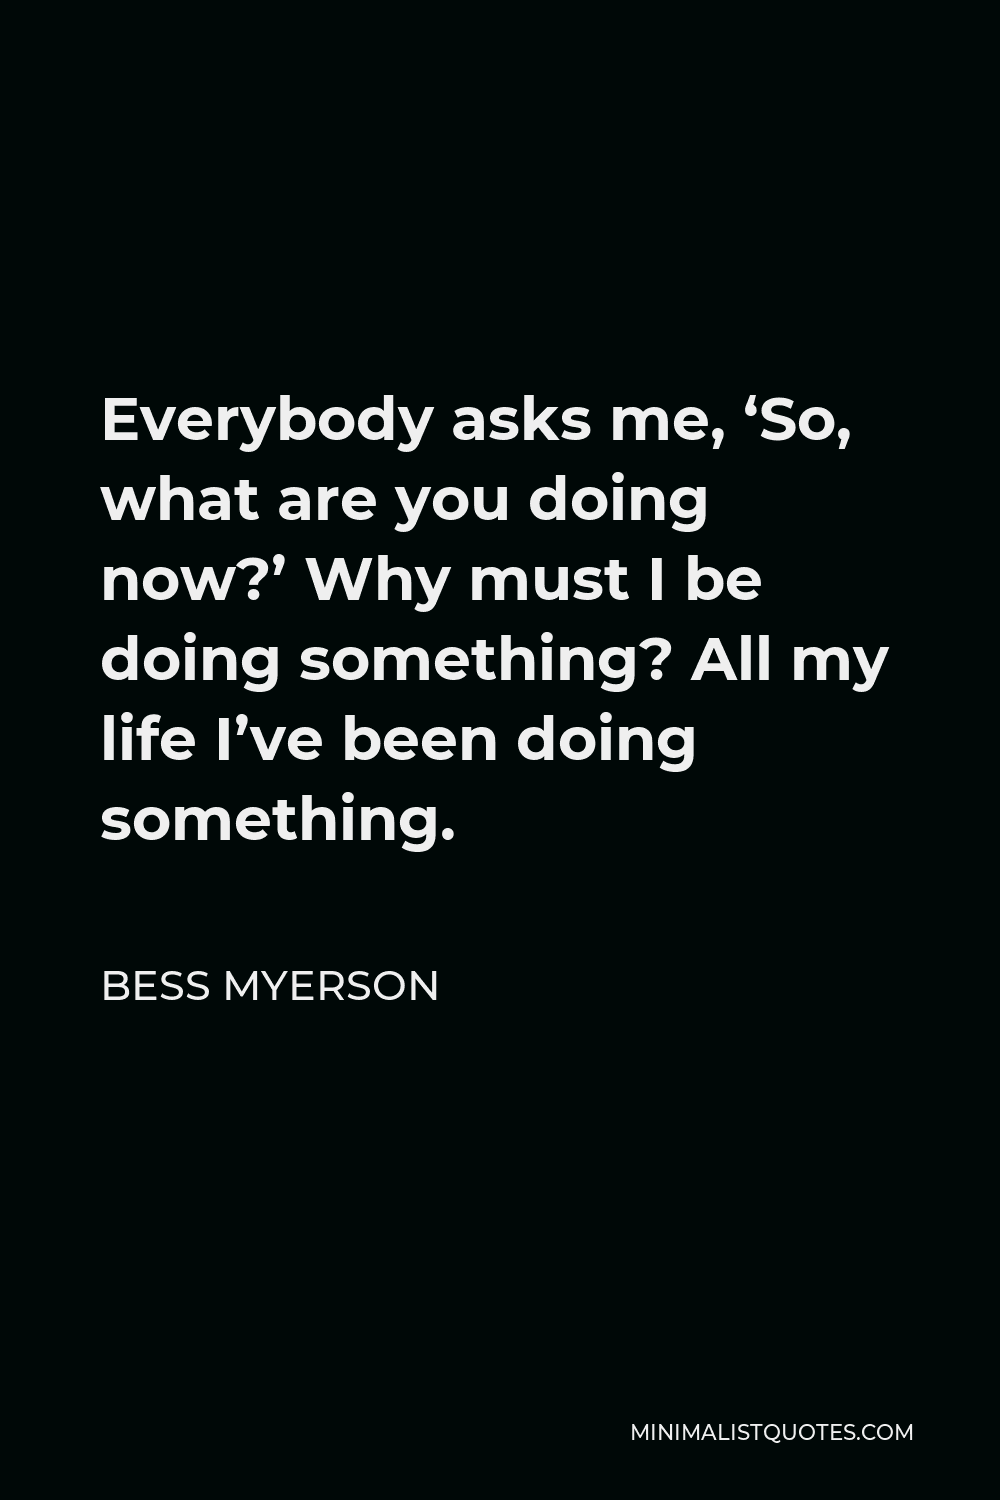 Bess Myerson Quote - Everybody asks me, ‘So, what are you doing now?’ Why must I be doing something? All my life I’ve been doing something.